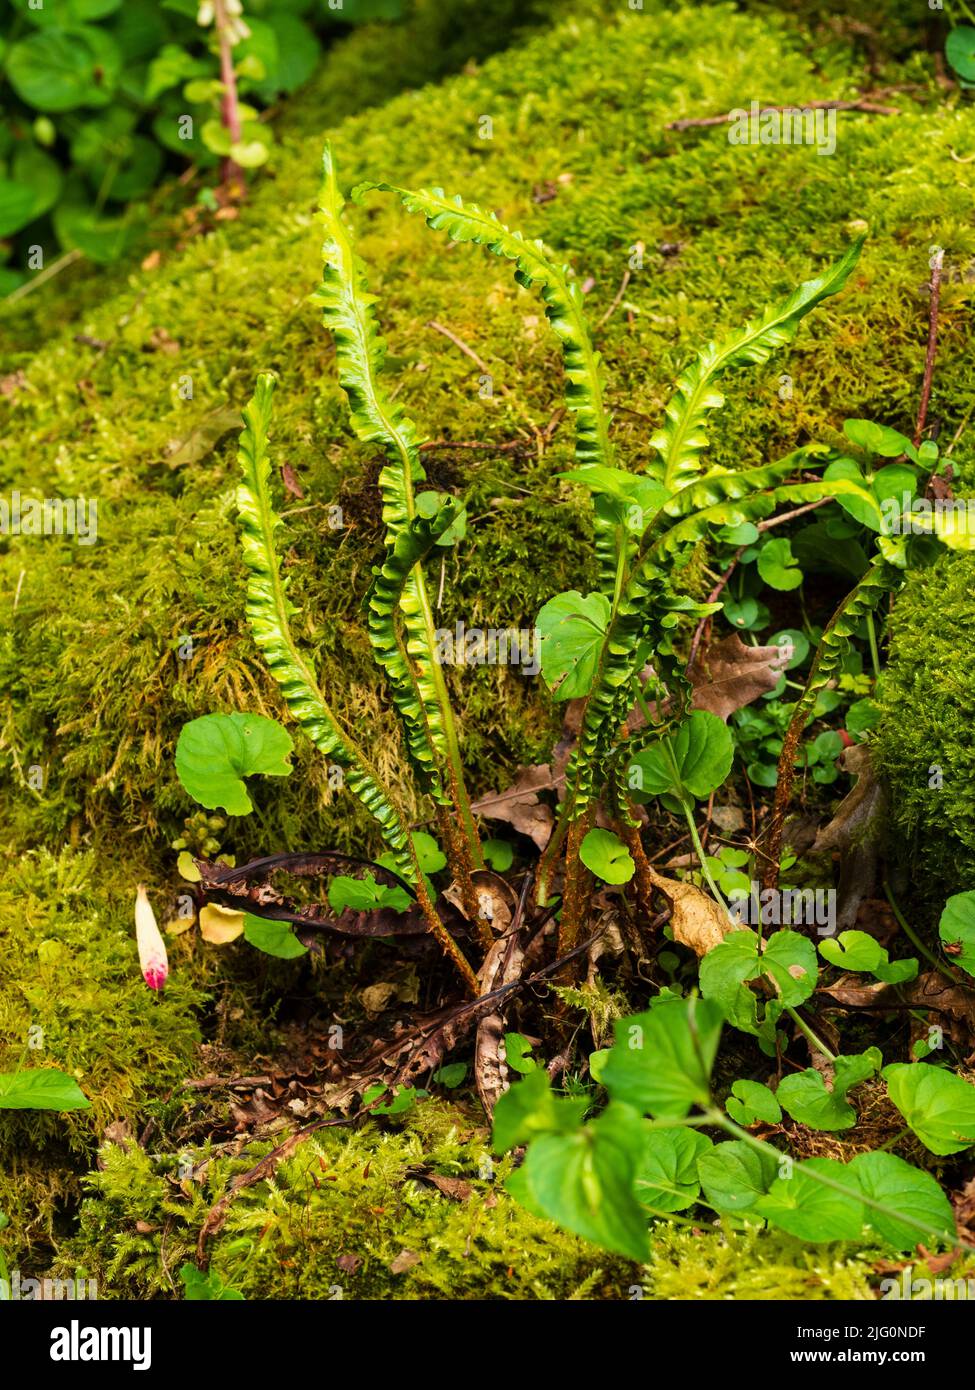 Narrow, heavily crimped fronds of the hardy evergreen hart's tongue fern, Asplenium scolopendrium 'Fimbriate recurved selection' Stock Photo